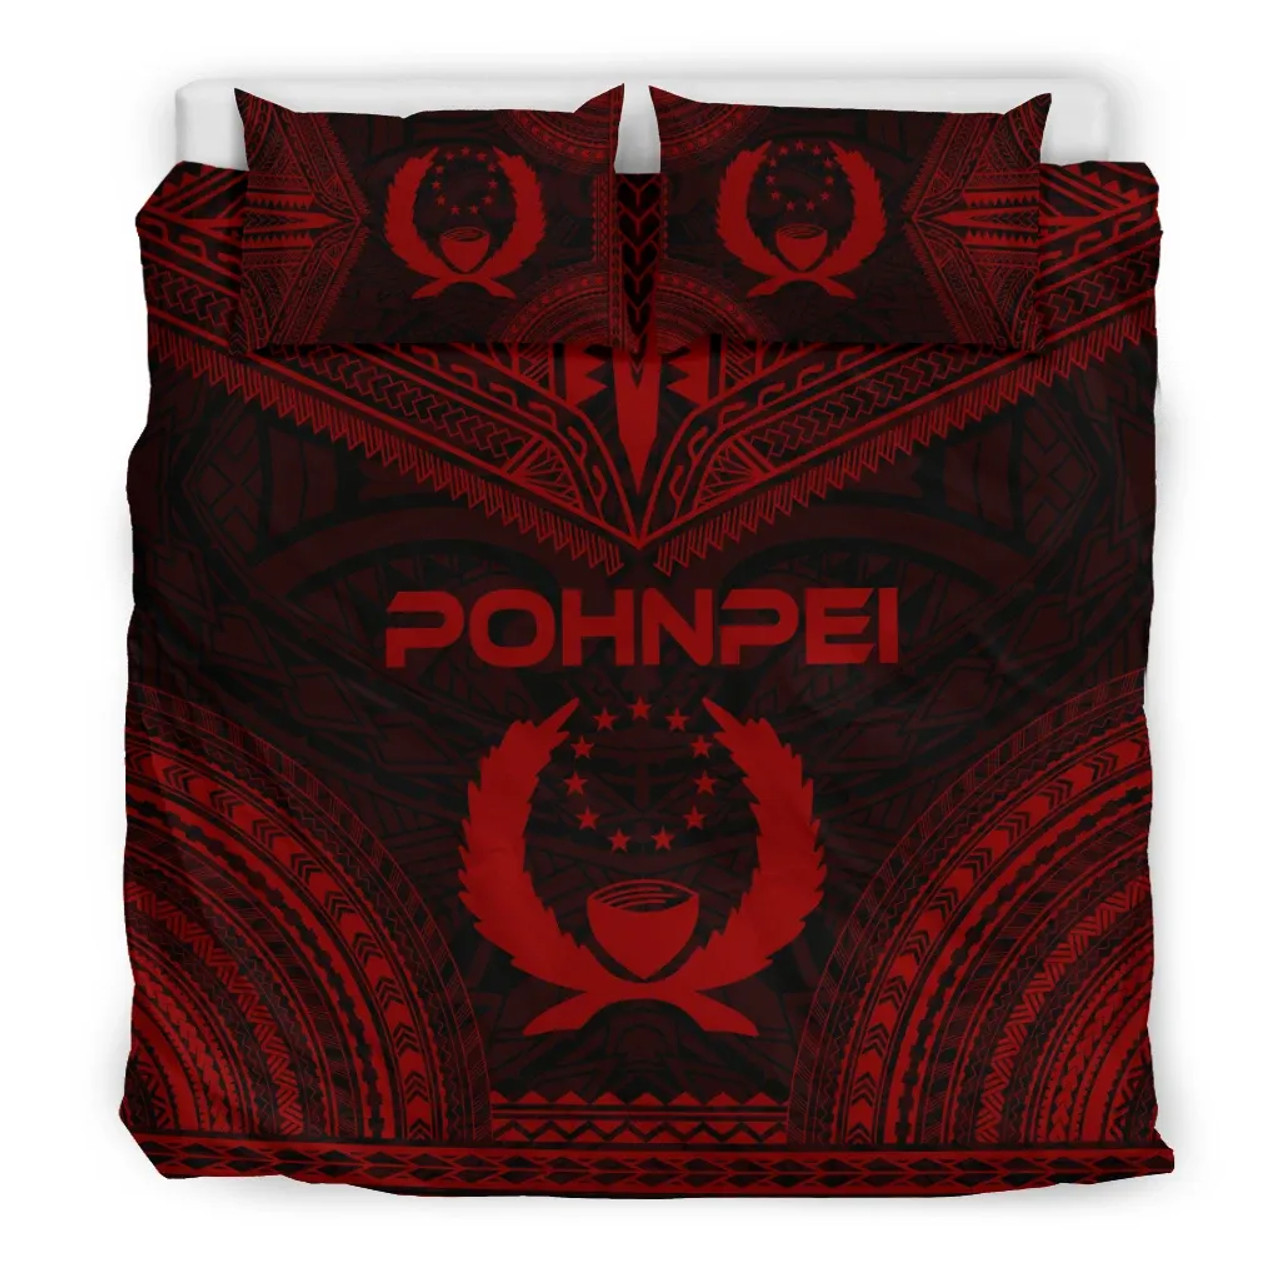 Pohnpei Polynesian Chief Duvet Cover Set - Red Version 3